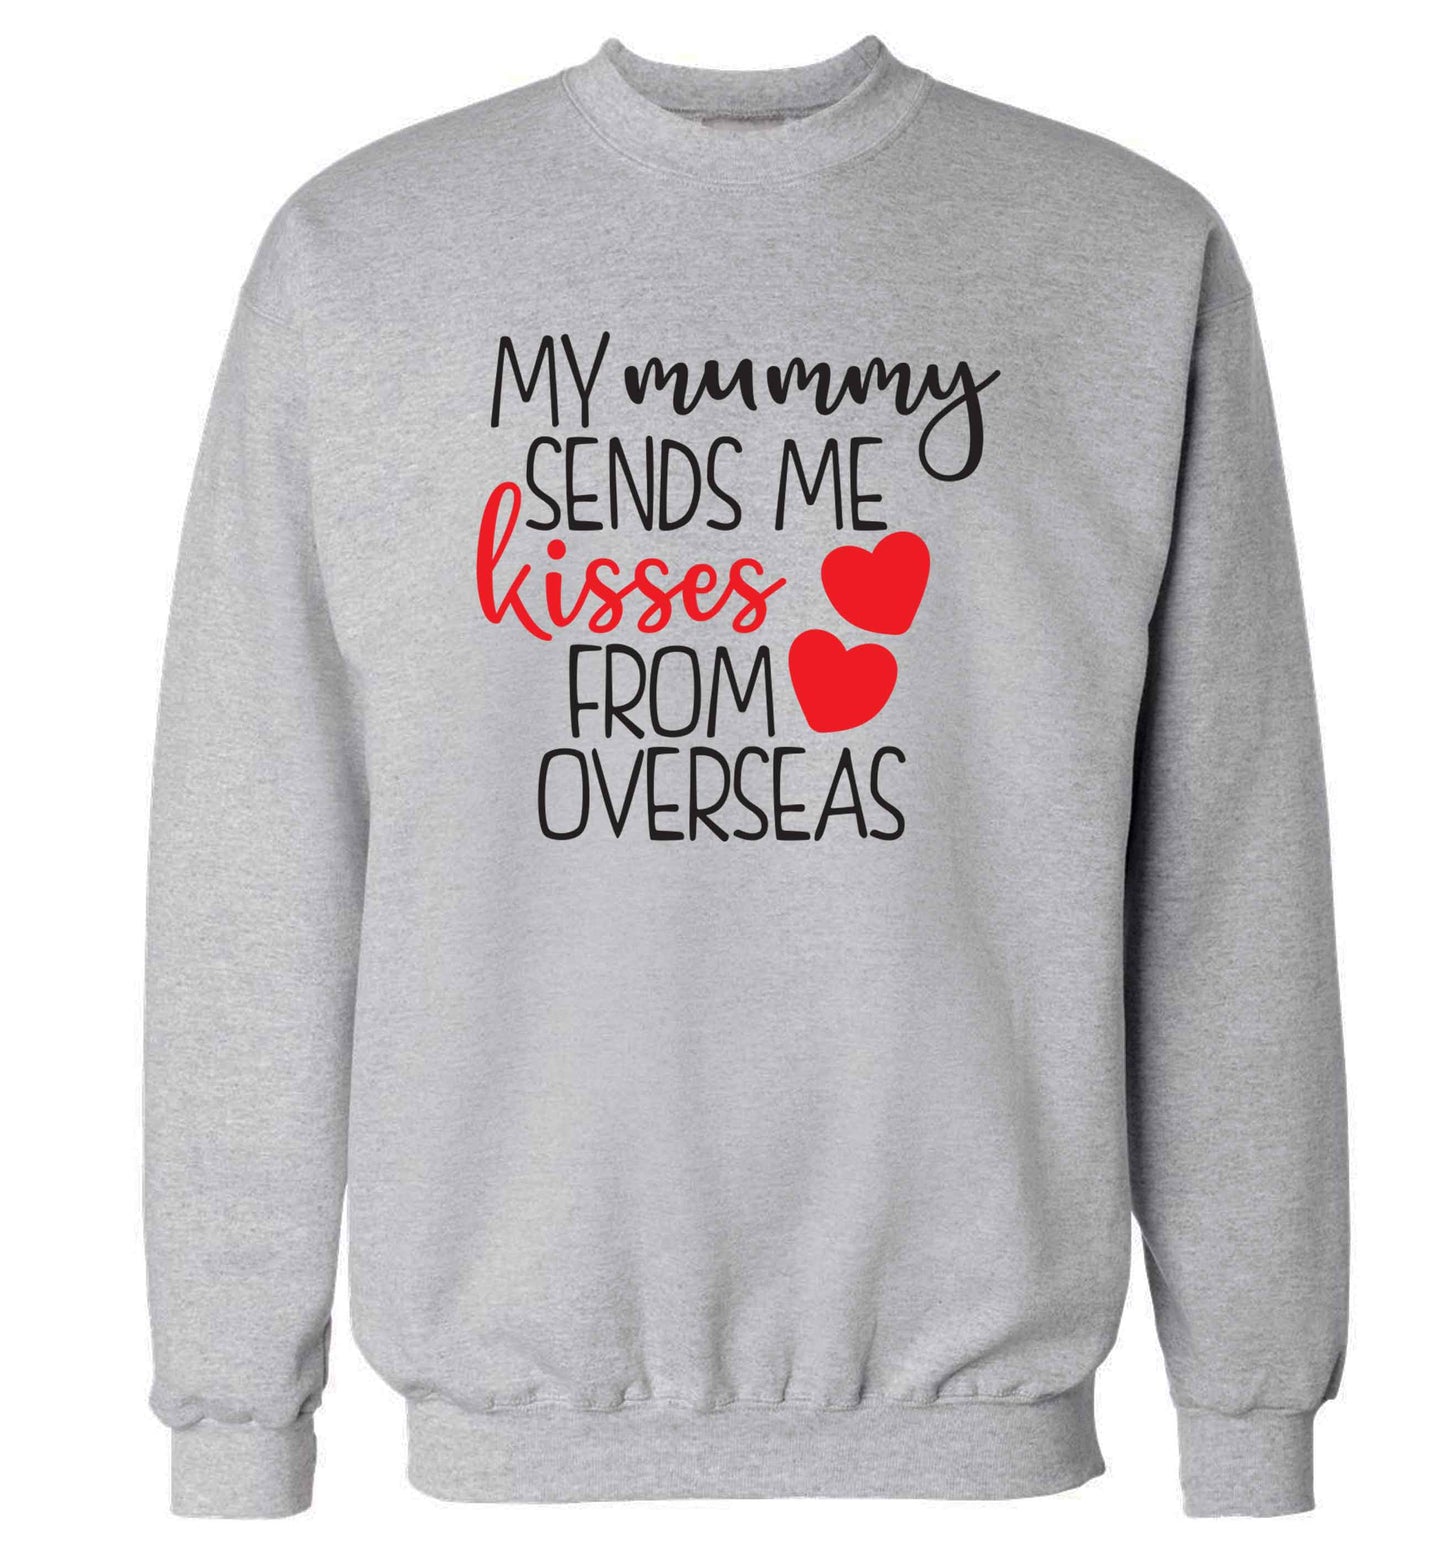 My mummy sends me kisses from overseas adult's unisex grey sweater 2XL